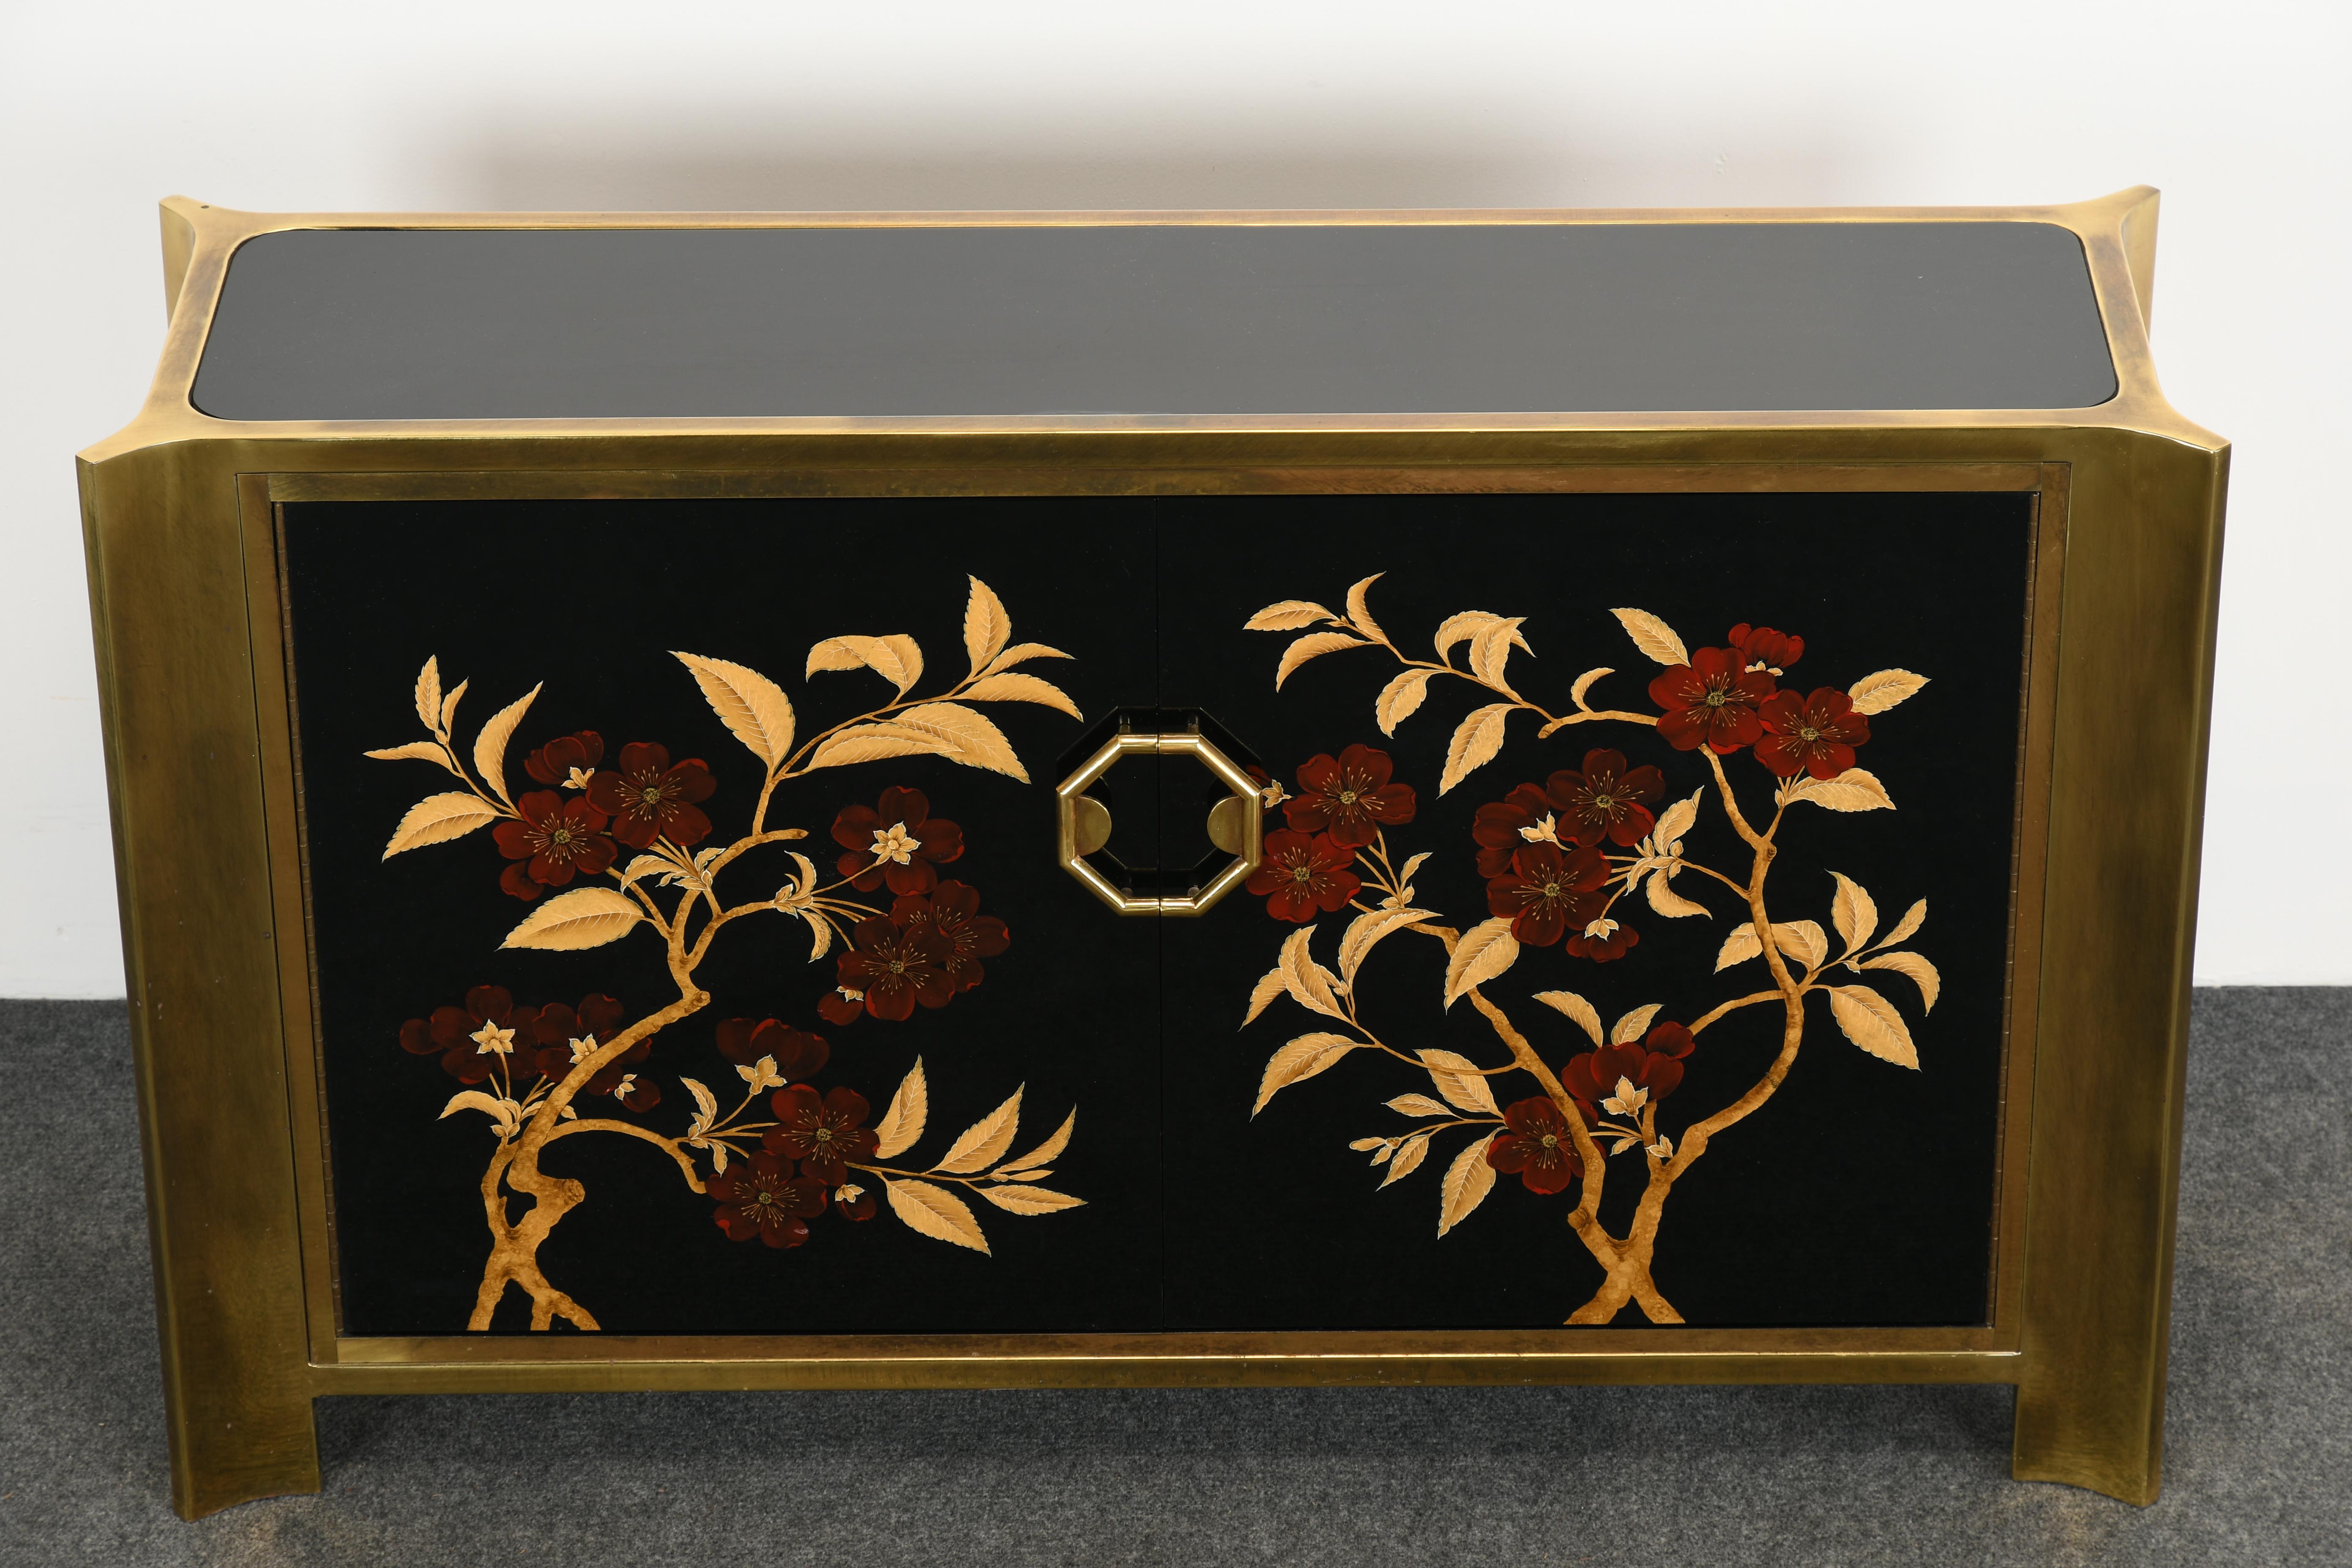 A gorgeous Mastercraft cabinet or console with monumental brass frame and floral design front. The cabinet size is a wonderful petit design that would work in almost any space such as a hallway or entryway. The black lacquer and details on the front